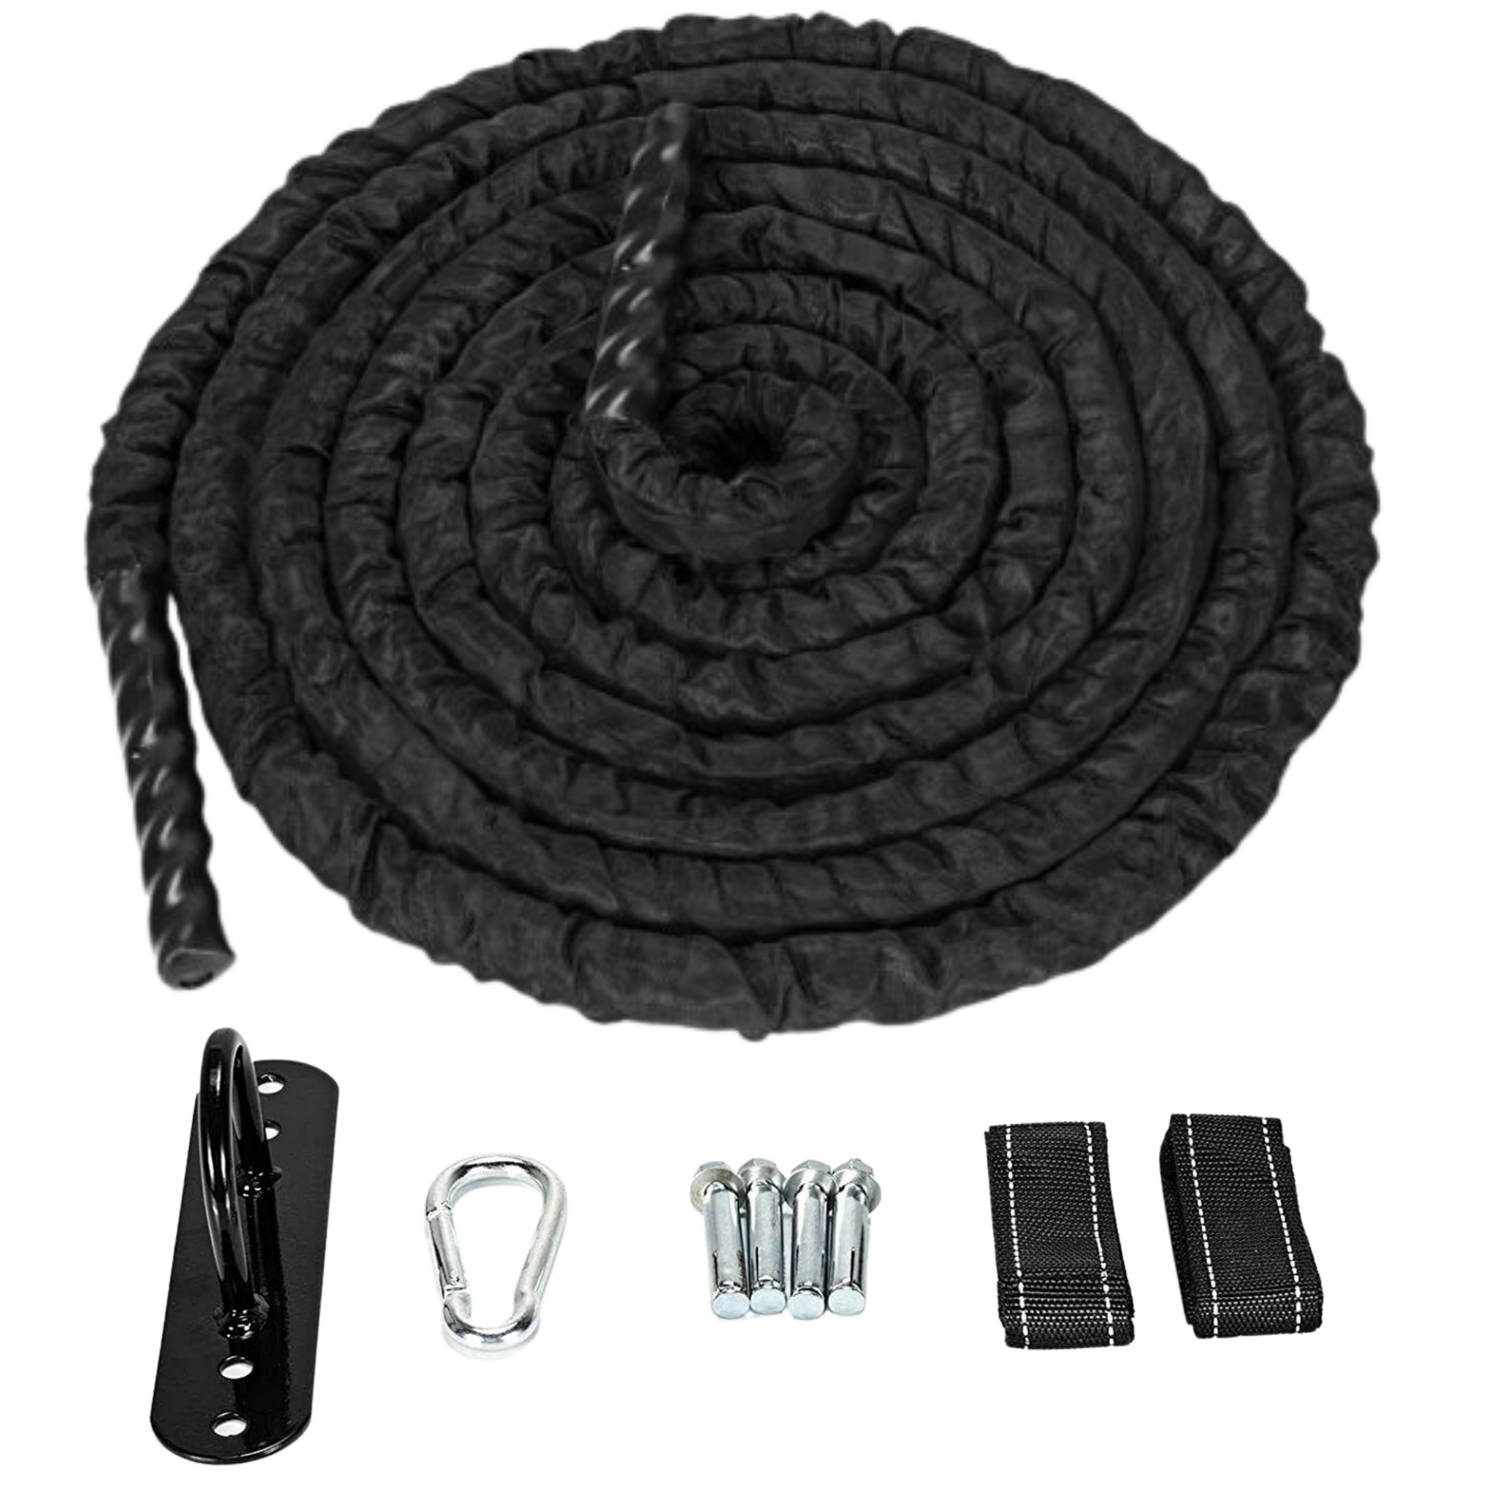 Zenzee Battle Rope Workout Rope Fitness Rope Fitness Touw 9m 12 kg Muuranker